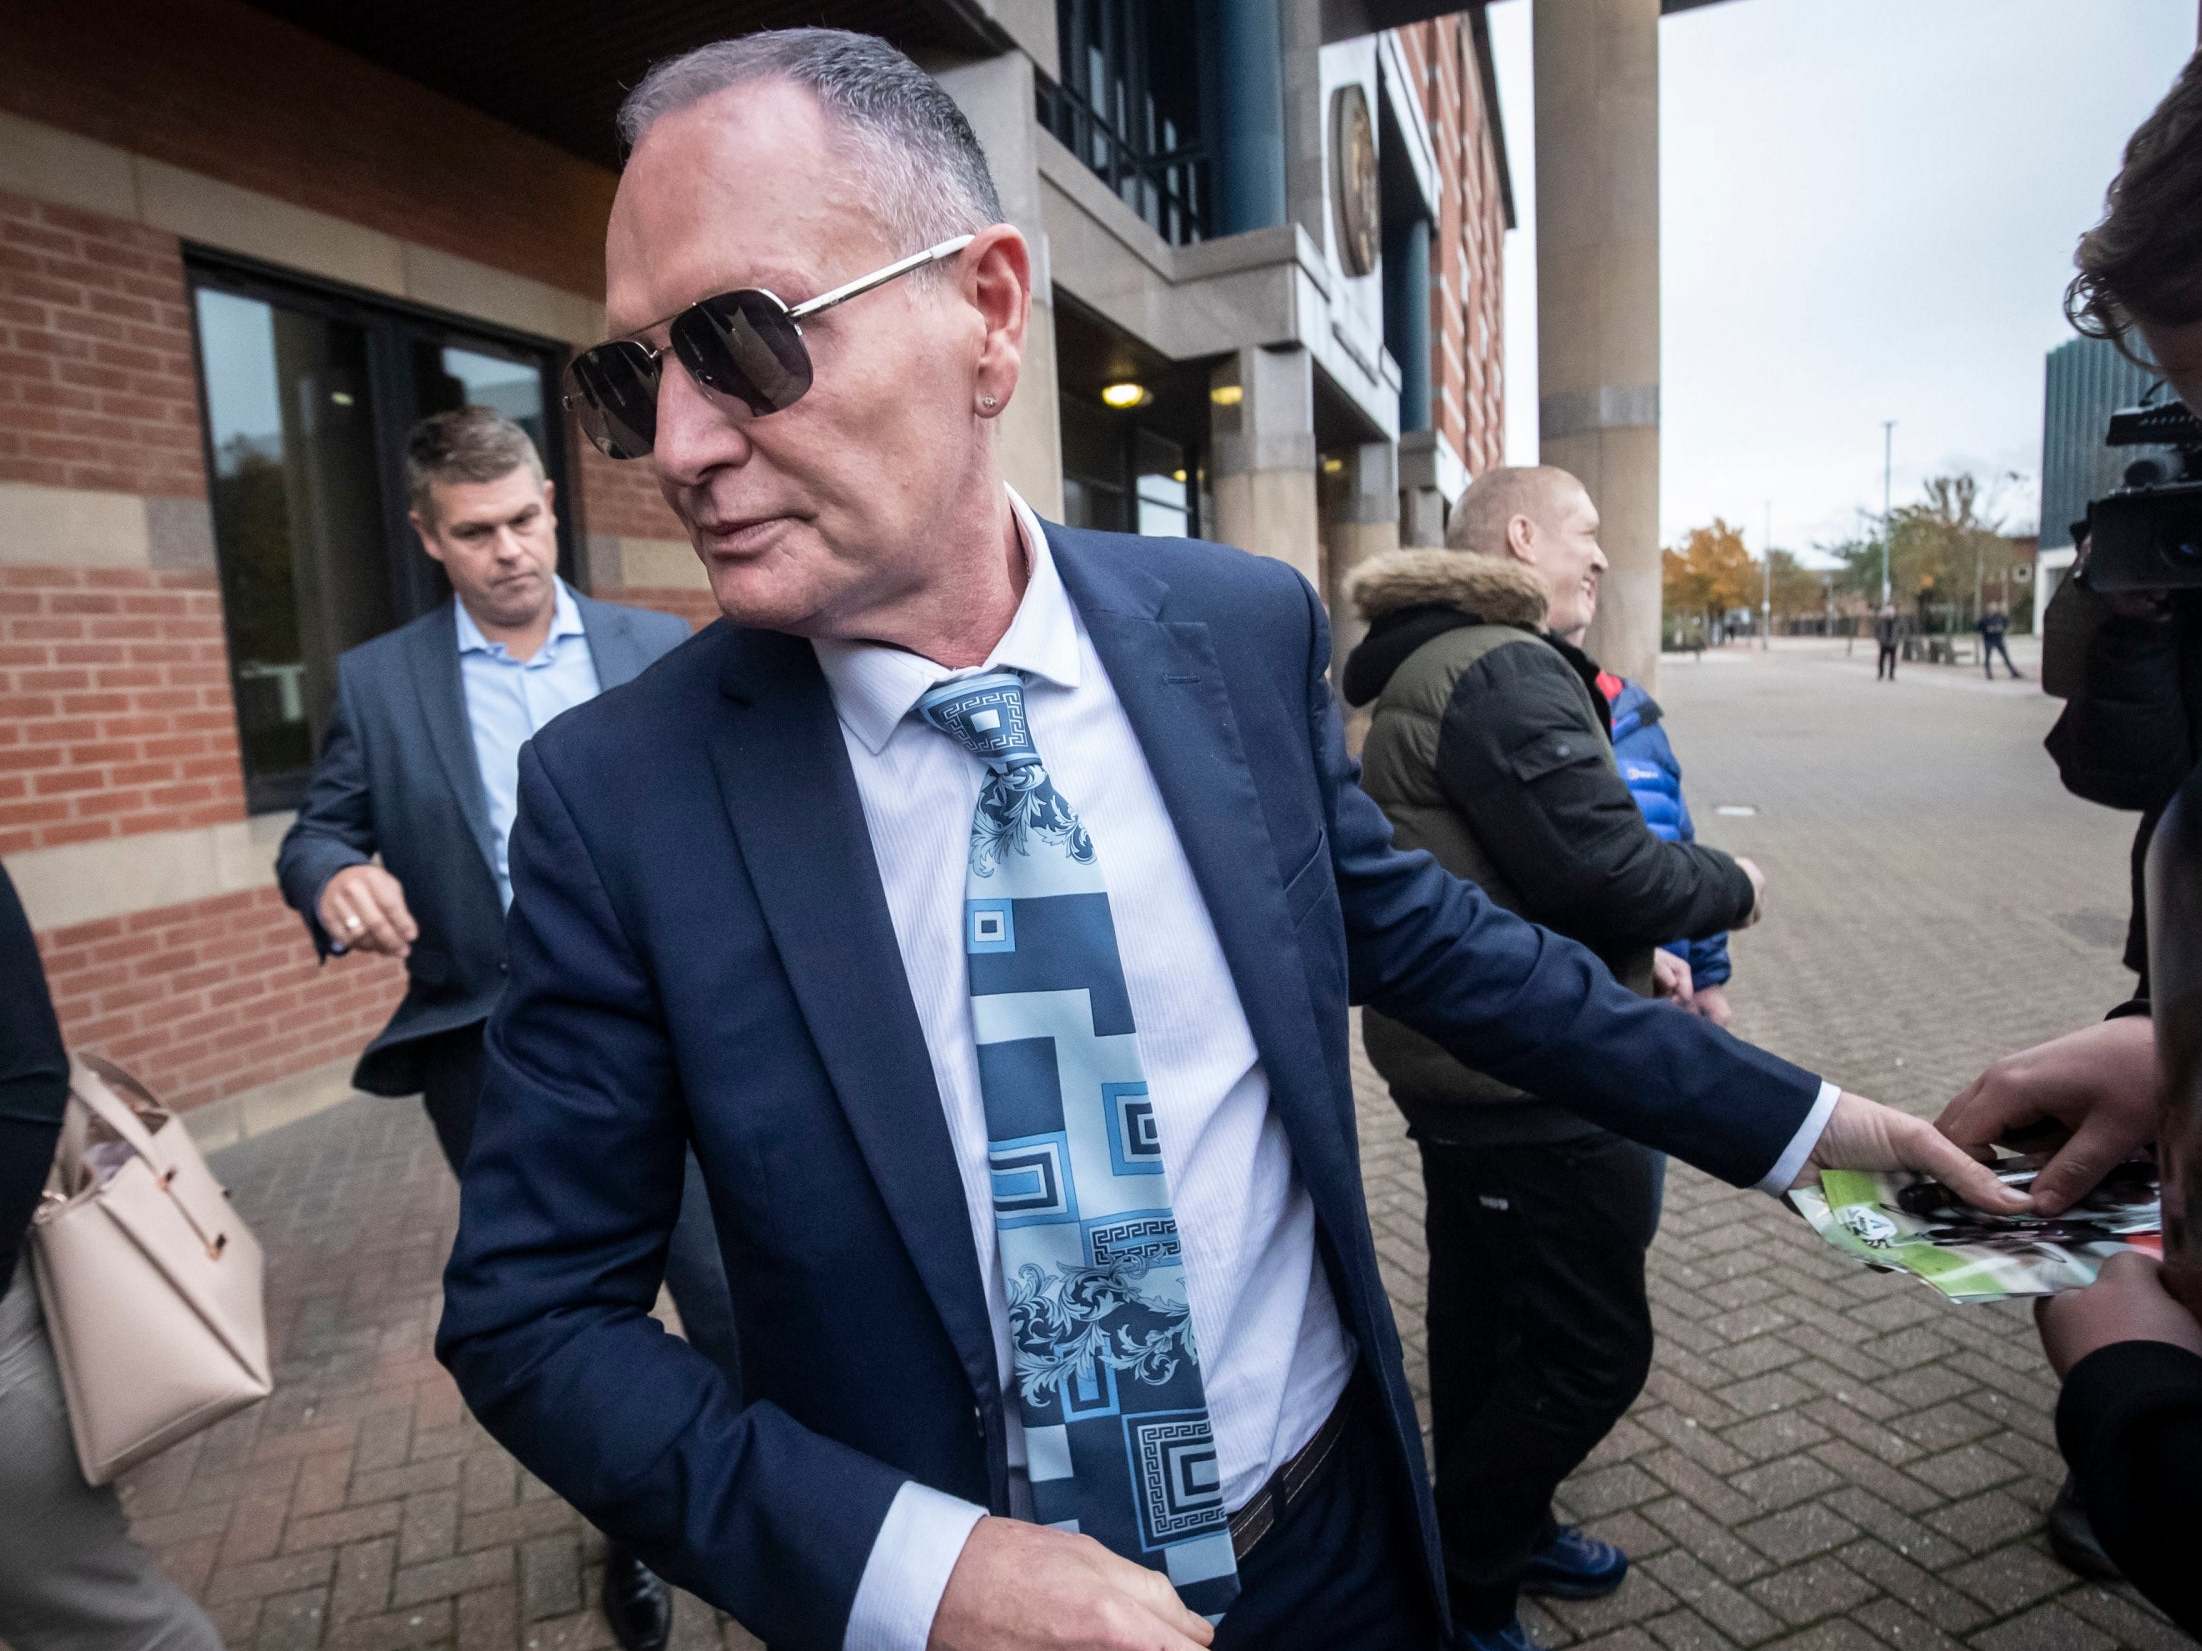 Former England footballer Paul Gascoigne leaves Teesside Crown Court in Middlesbrough on Monday